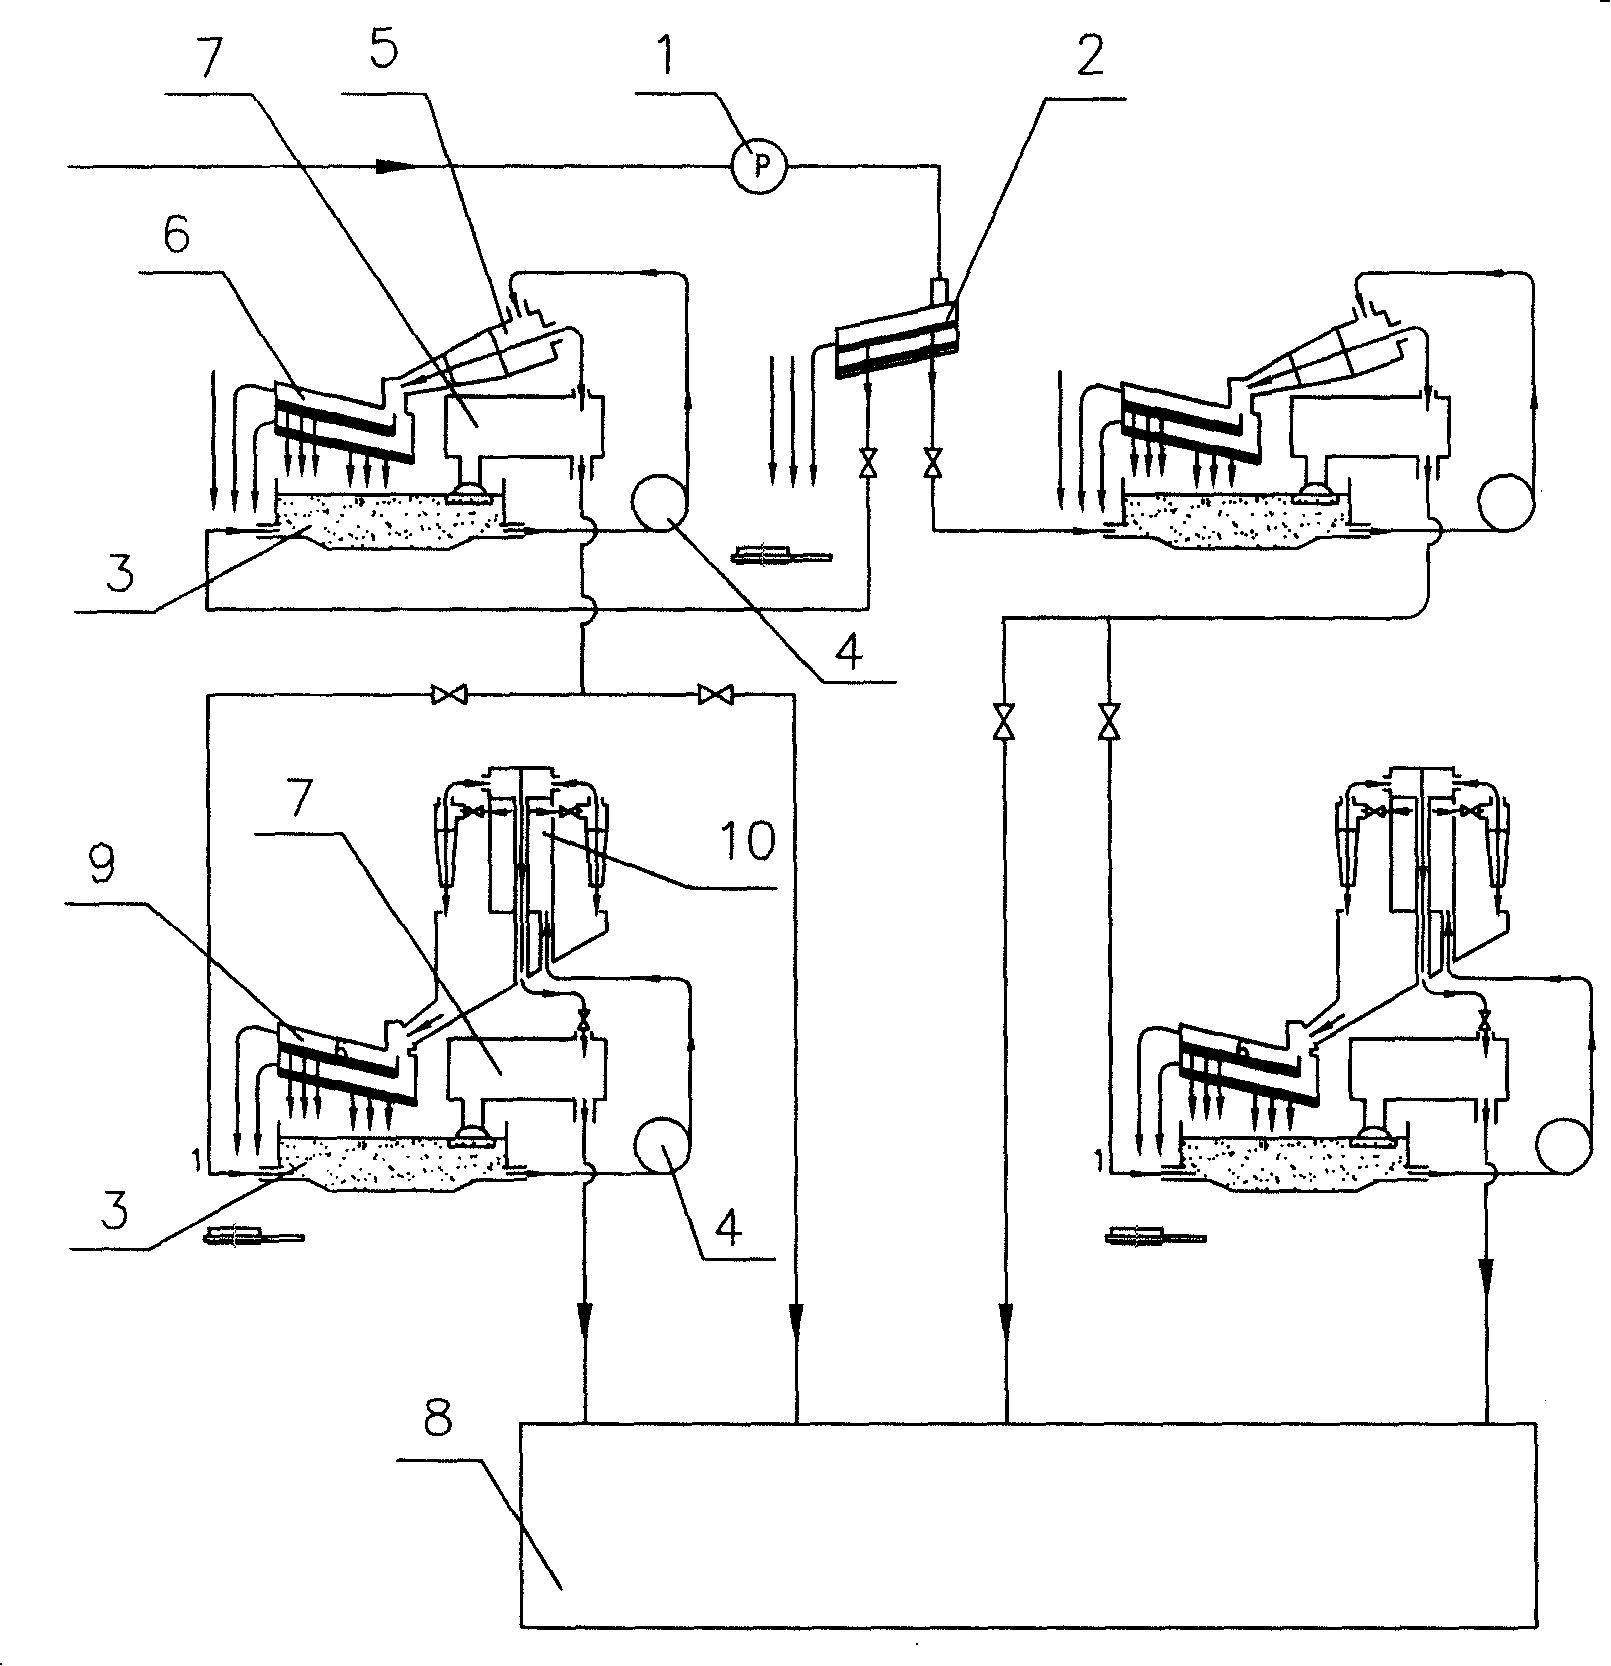 Plaster multi-step treatment device for underground engineering construction